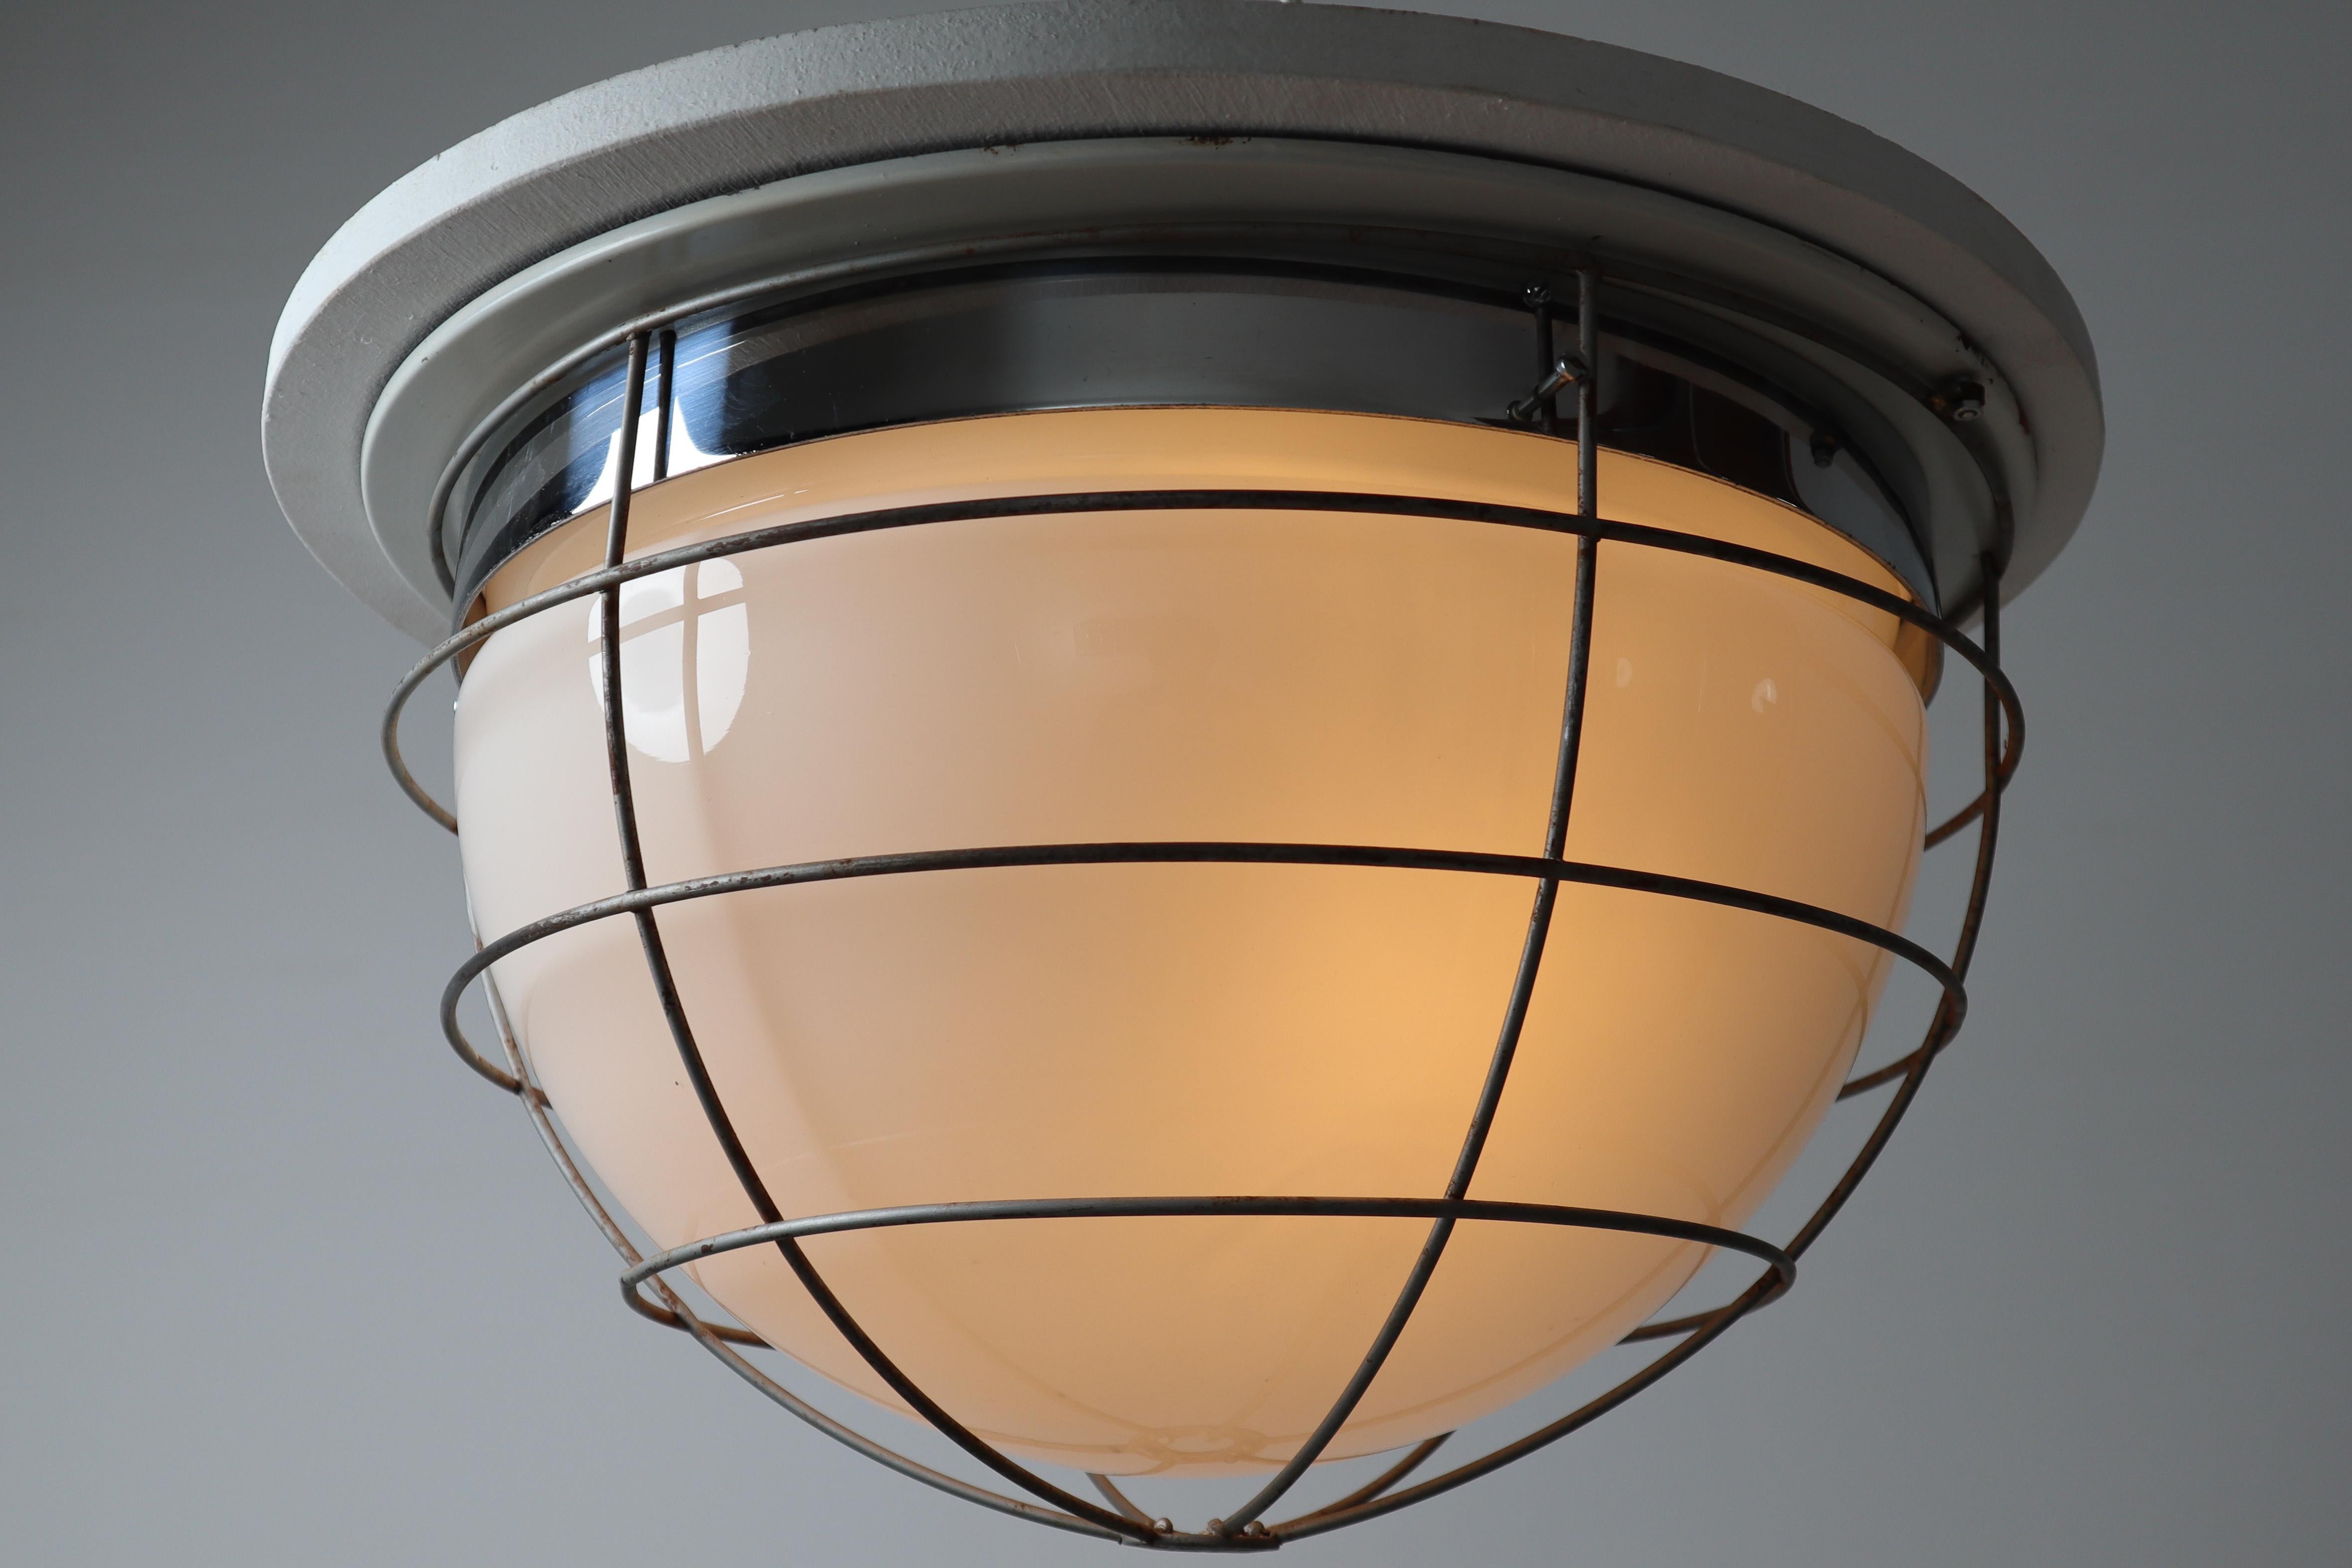 Midcentury Industrial ceiling light or wall scones with steel frame lacquered fitted with two E27 bulbs up to 100W and with opaline glass shade and a protection grid. Europe, 1960s. Very good condition with nice patina on steel parts.

Please note